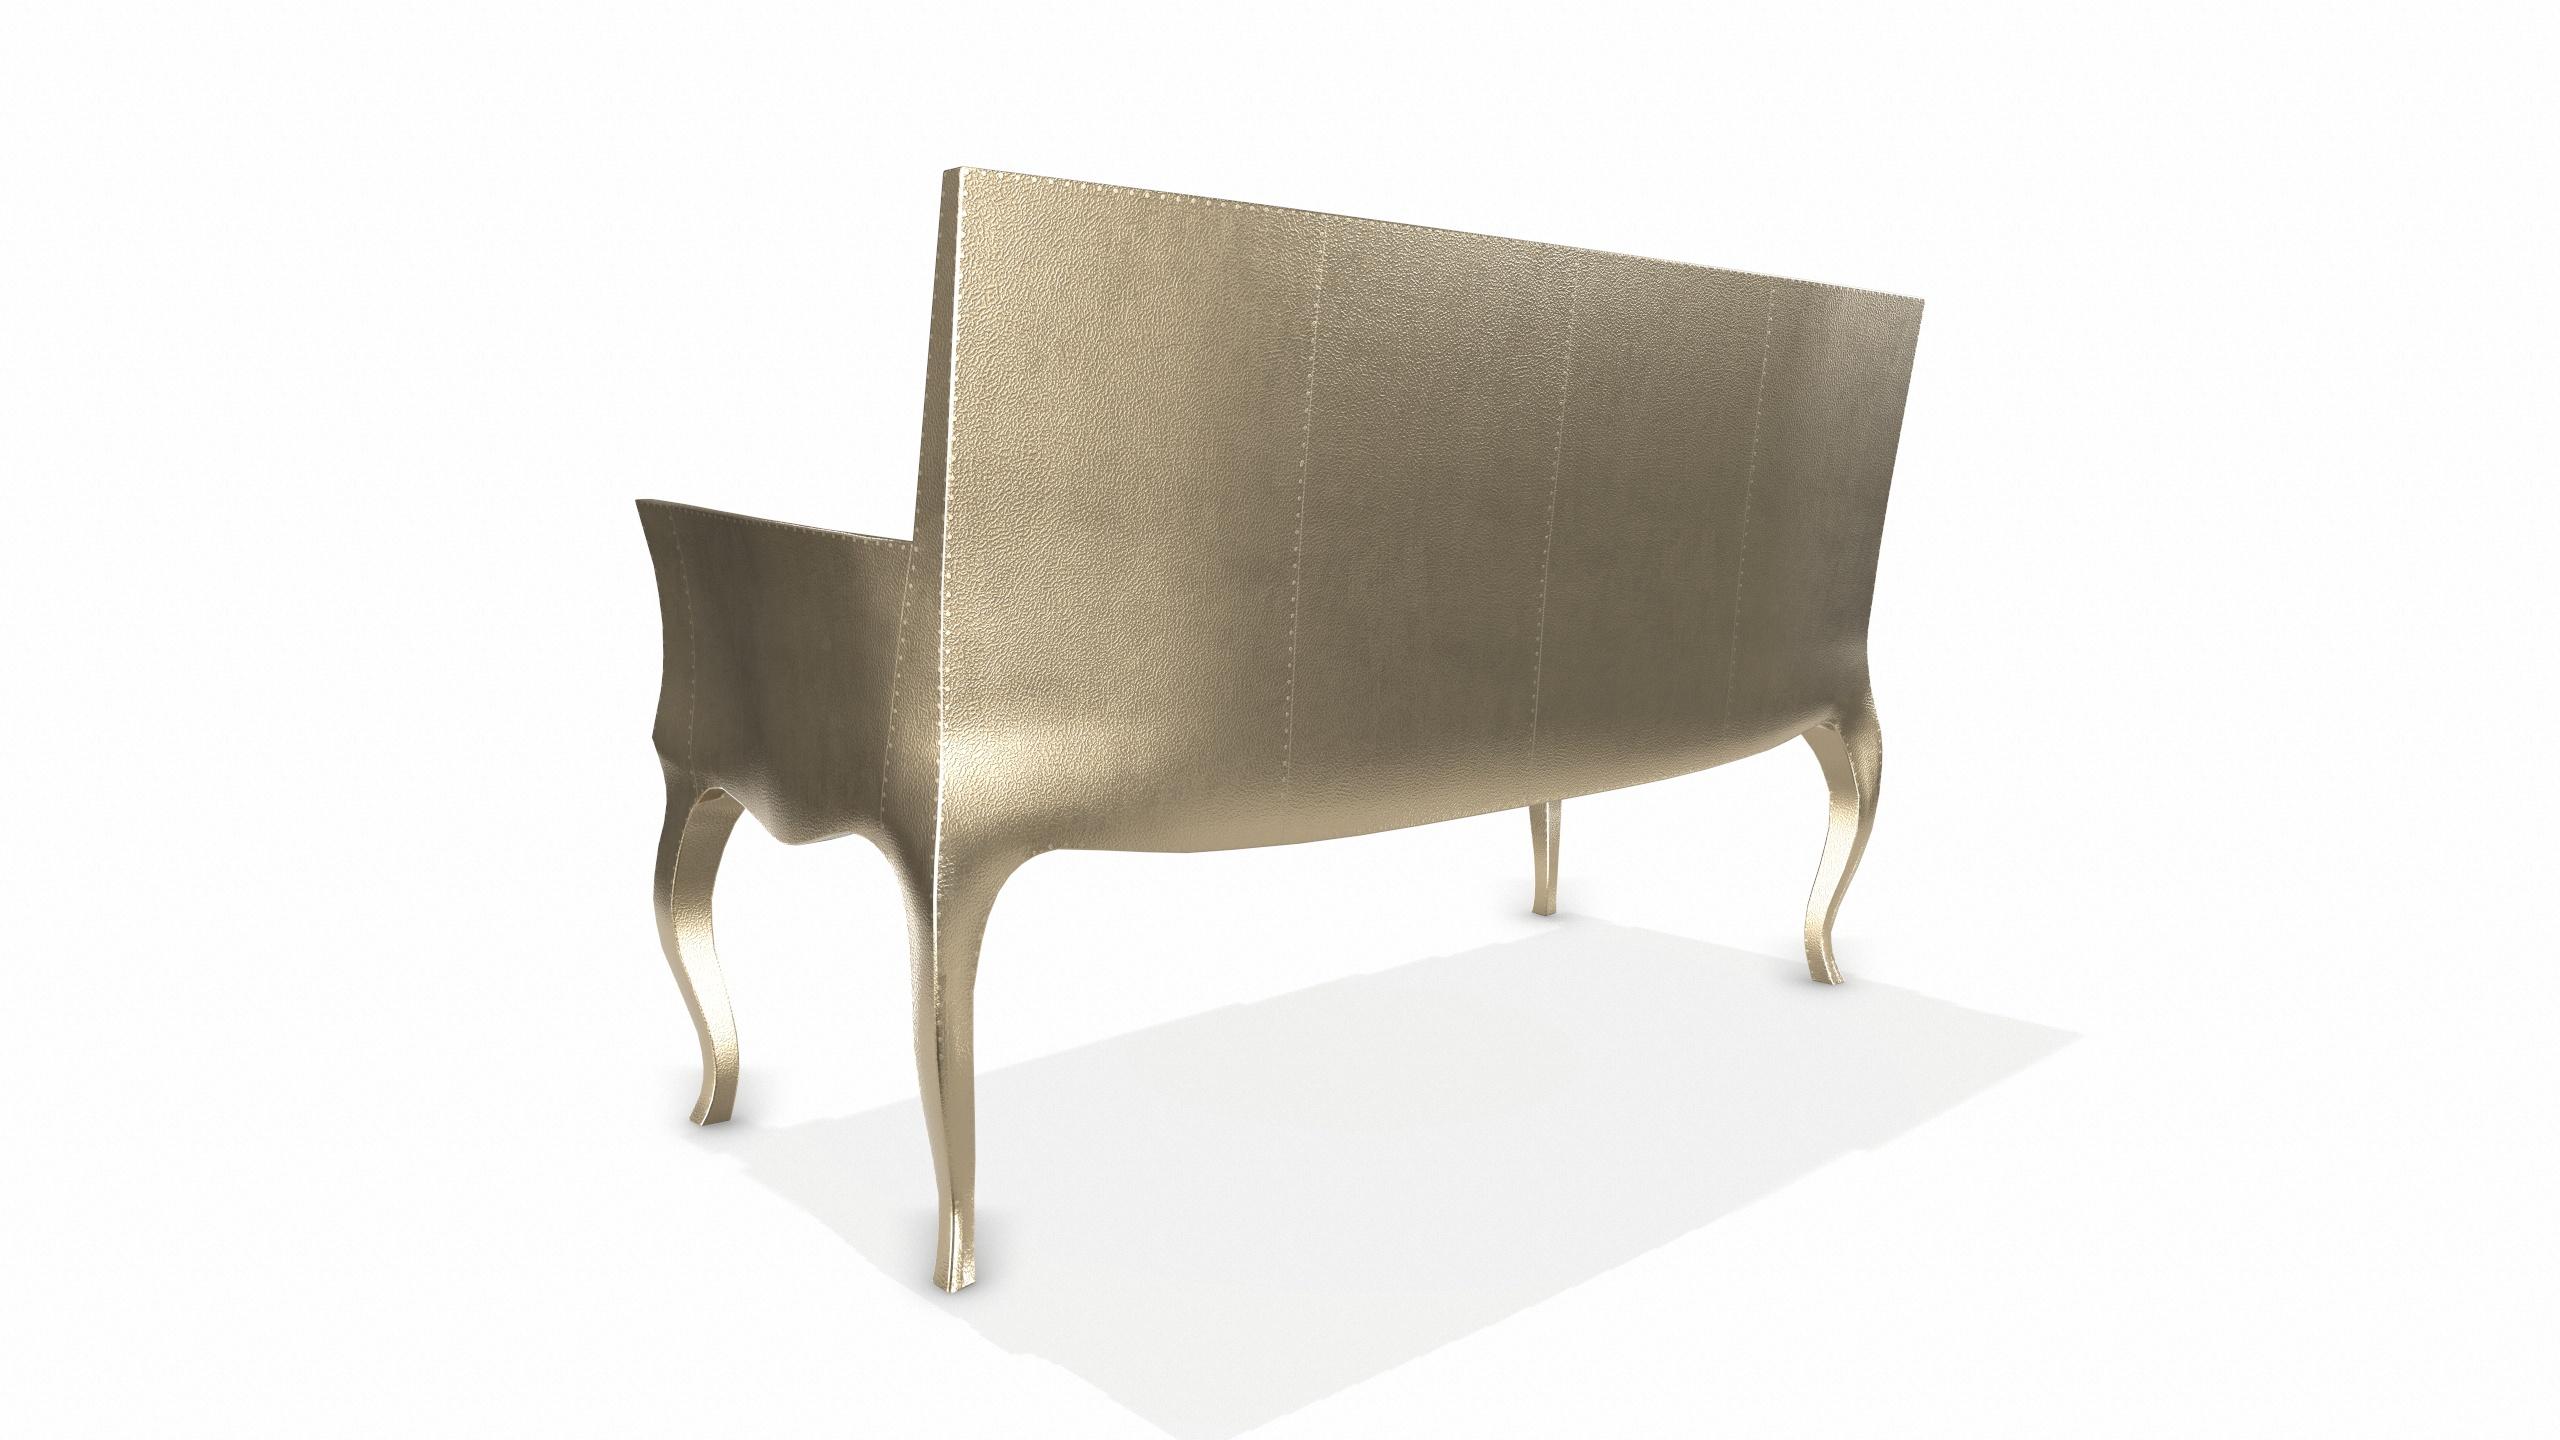 Other Louise Settee Art Deco Loveseats in Fine Hammered Brass by Paul Mathieu For Sale